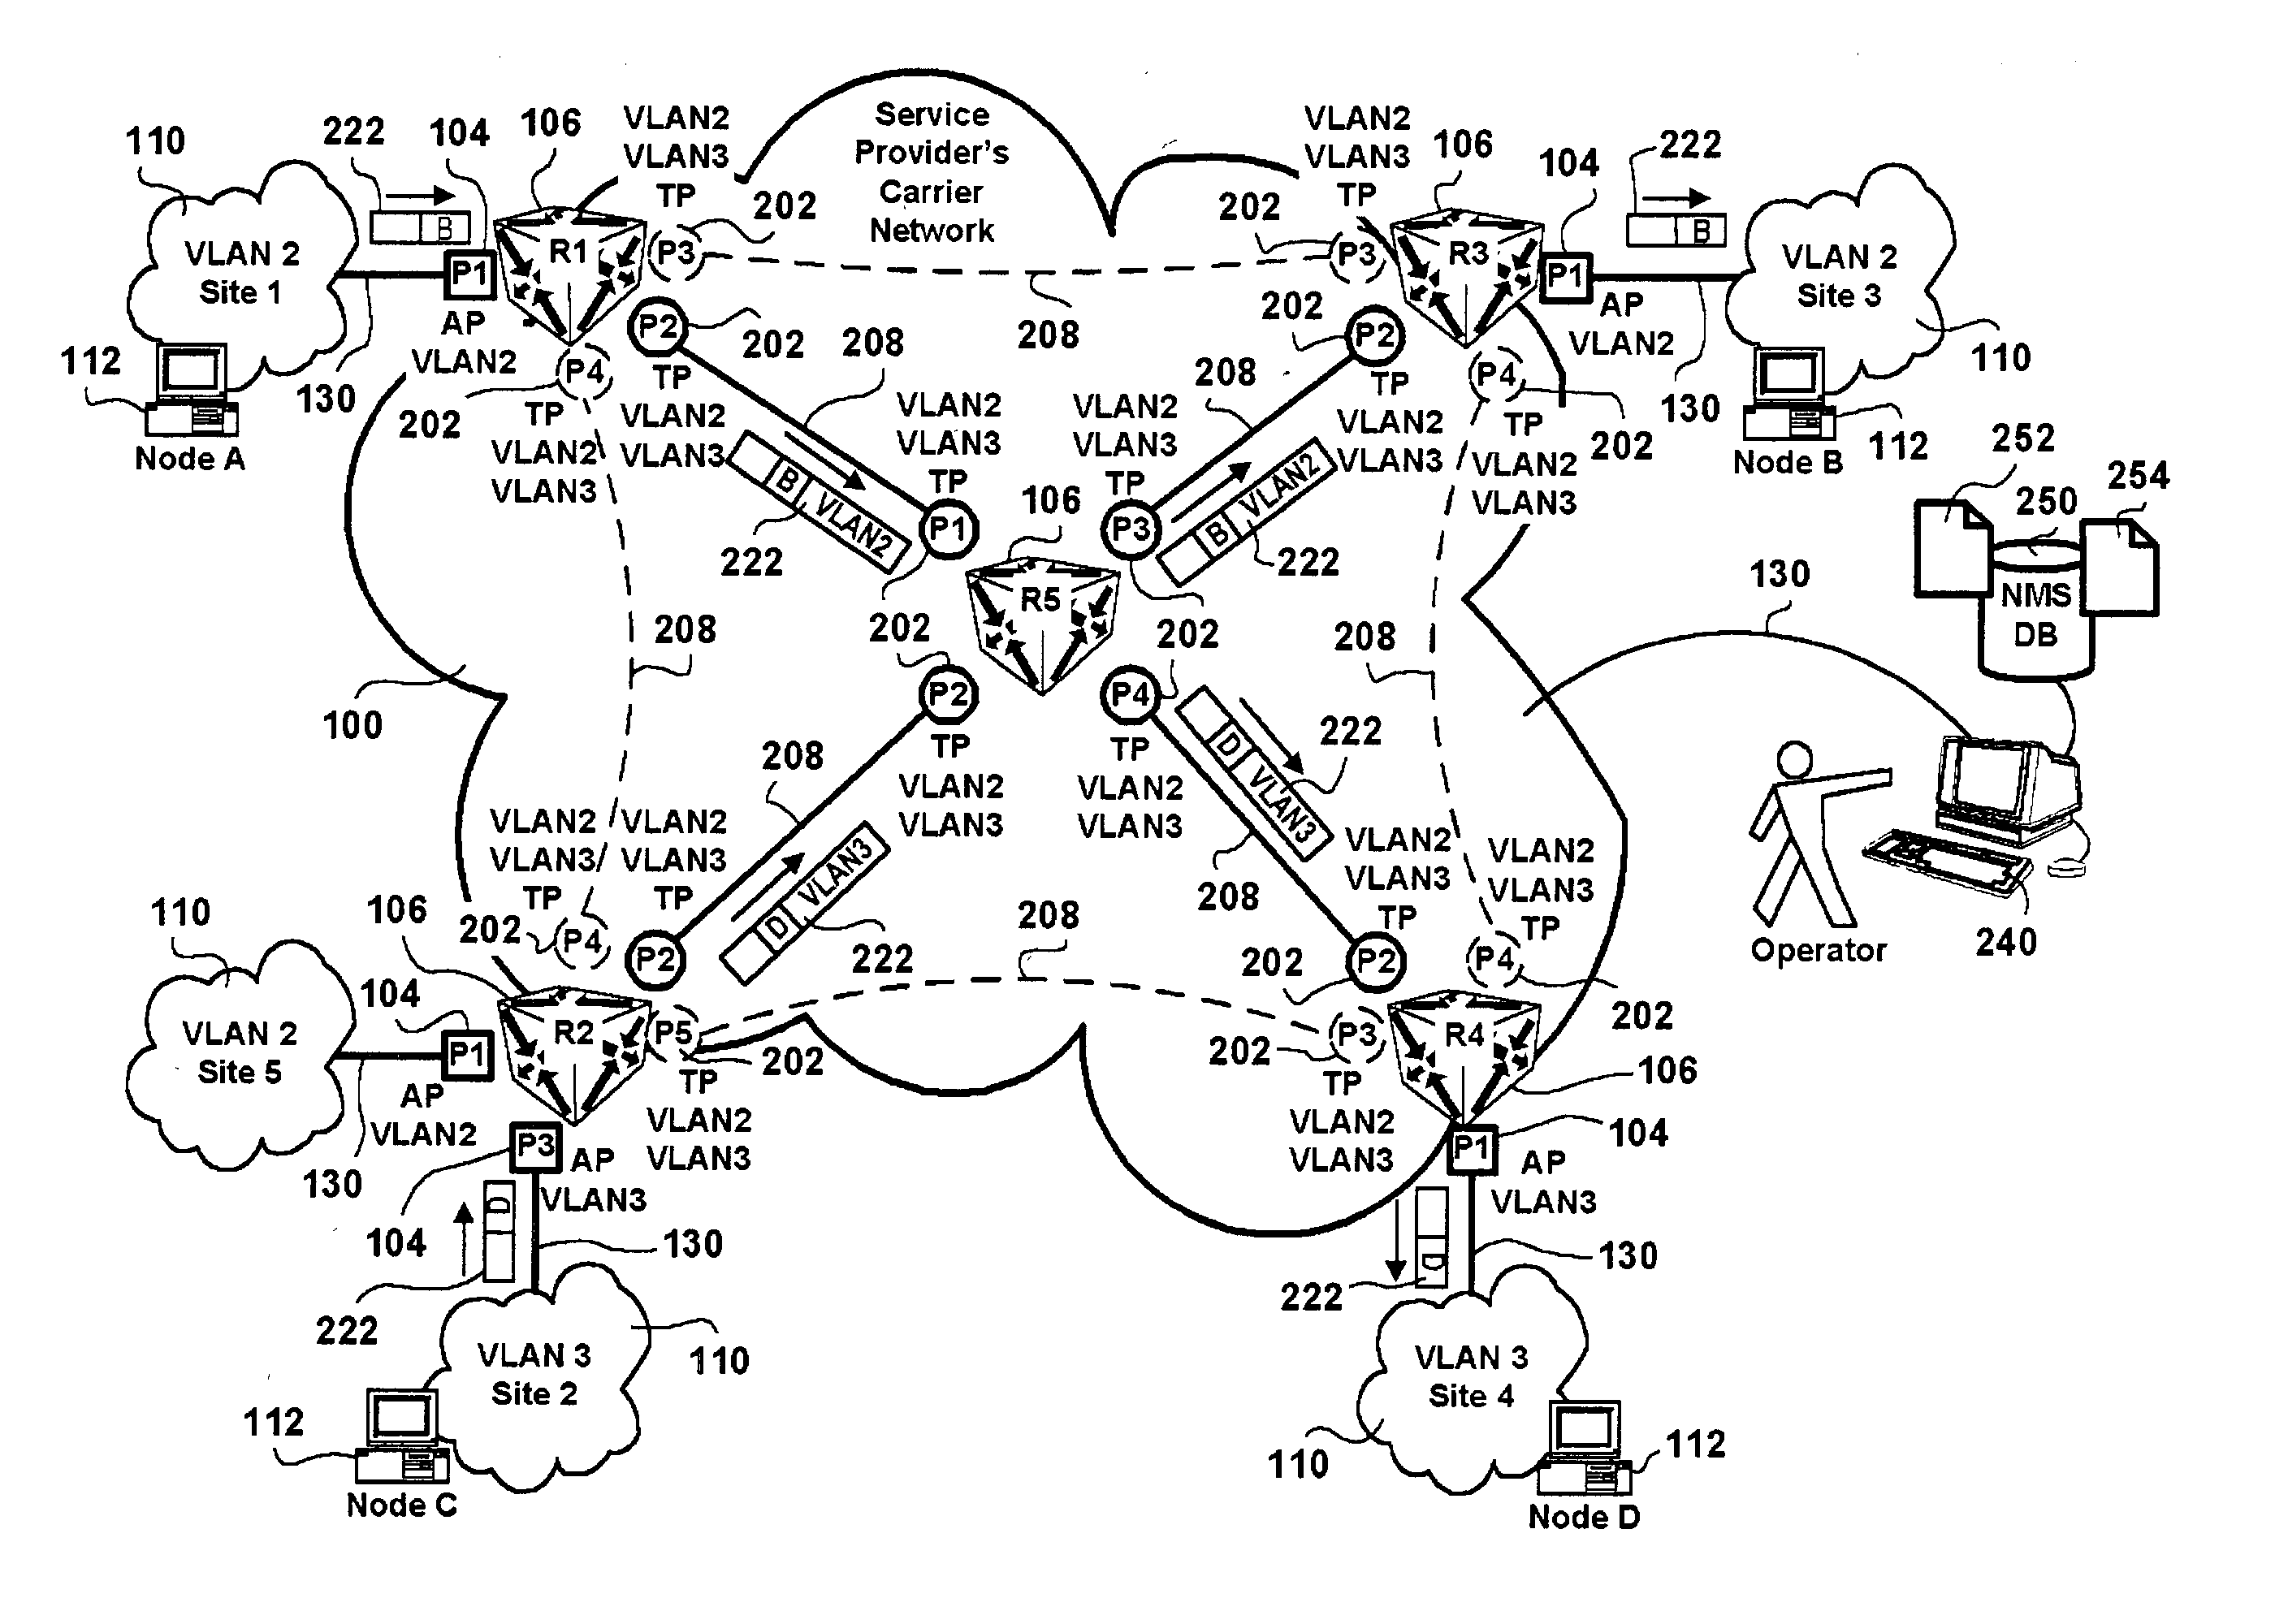 Virtual local area network provisioning in bridged networks